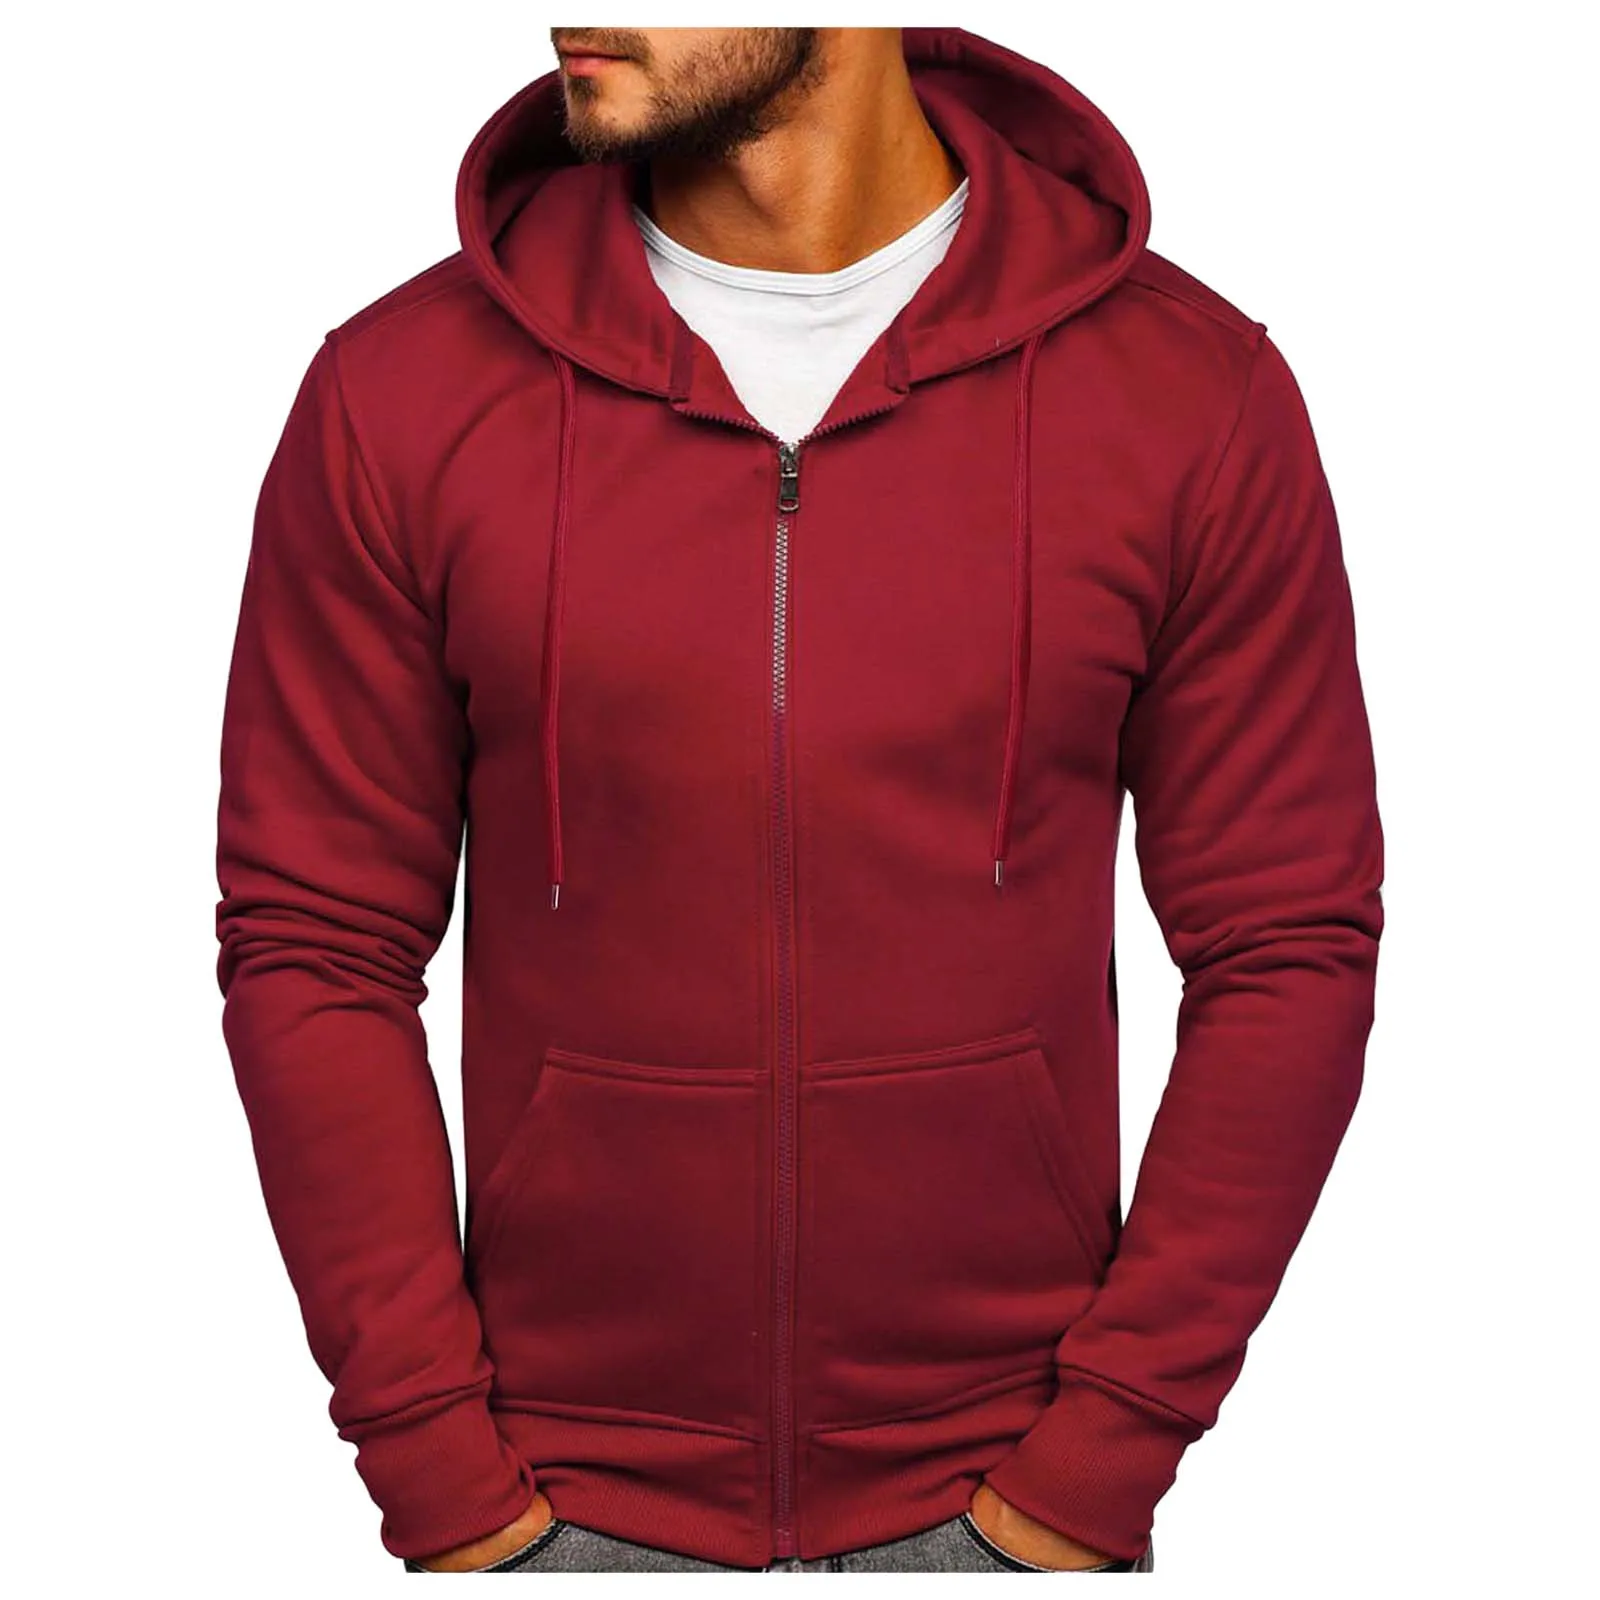 

Men Zip Up Solid Color Hoodie Autumn Winter Cardigan Hooded Sweatshirts Fitness Gym Bodybuilding Sports Outwork Man Tracksuits